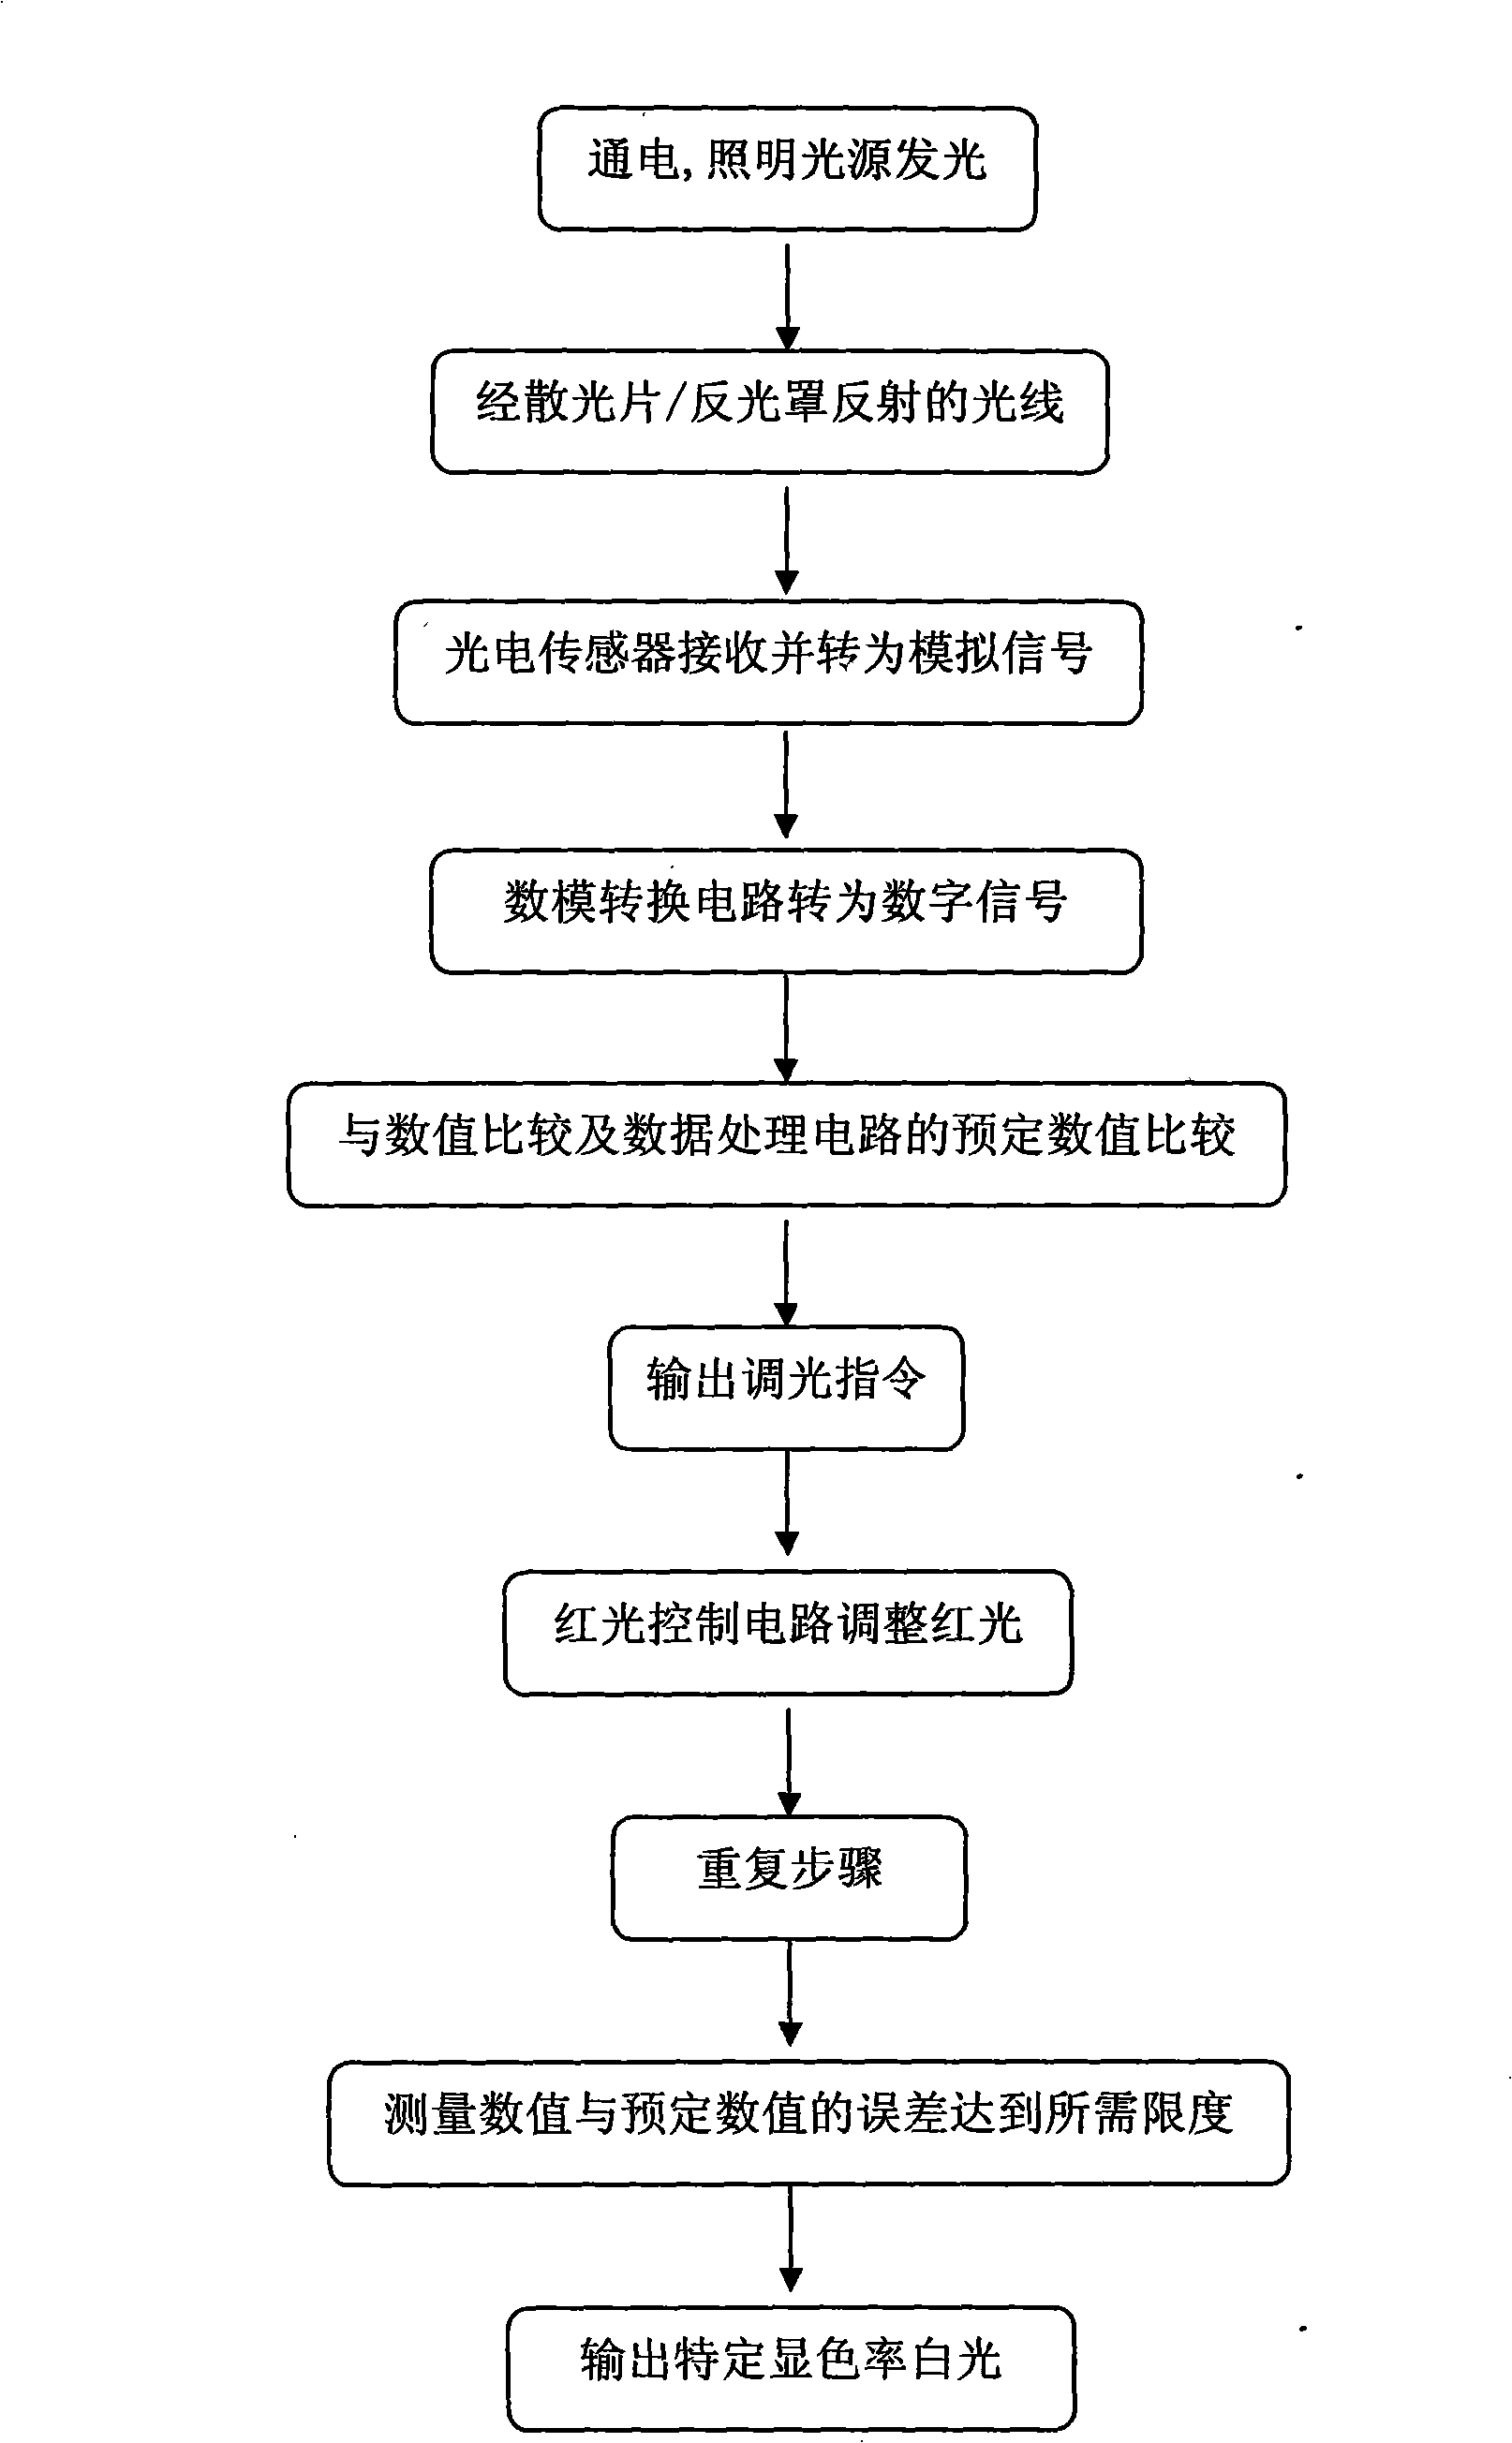 Light and color controllable illumination device and method using automatic white balance for regulation and control